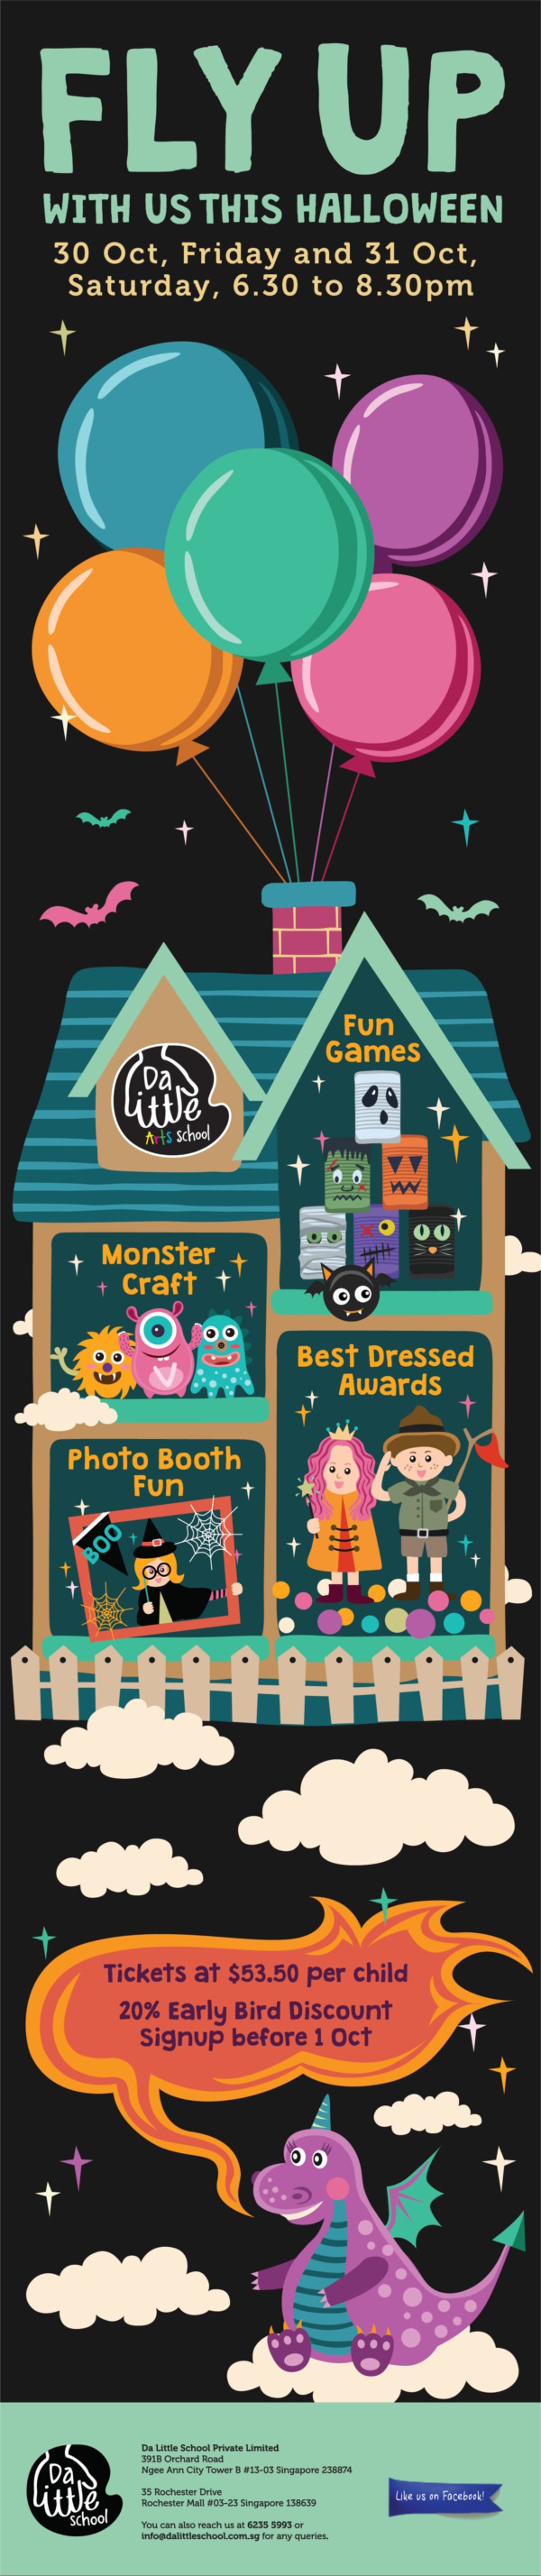 Fly Up with us this Halloween 30 Oct, Friday and 31 Oct Saturday 6.30 to 8.30pm. Da Little Arts School - Fun Games, Monster Craft, Best Dressed Awards and Photo Booth Fun. 20% Early Bird Discount Signup before 1 Oct 2015.